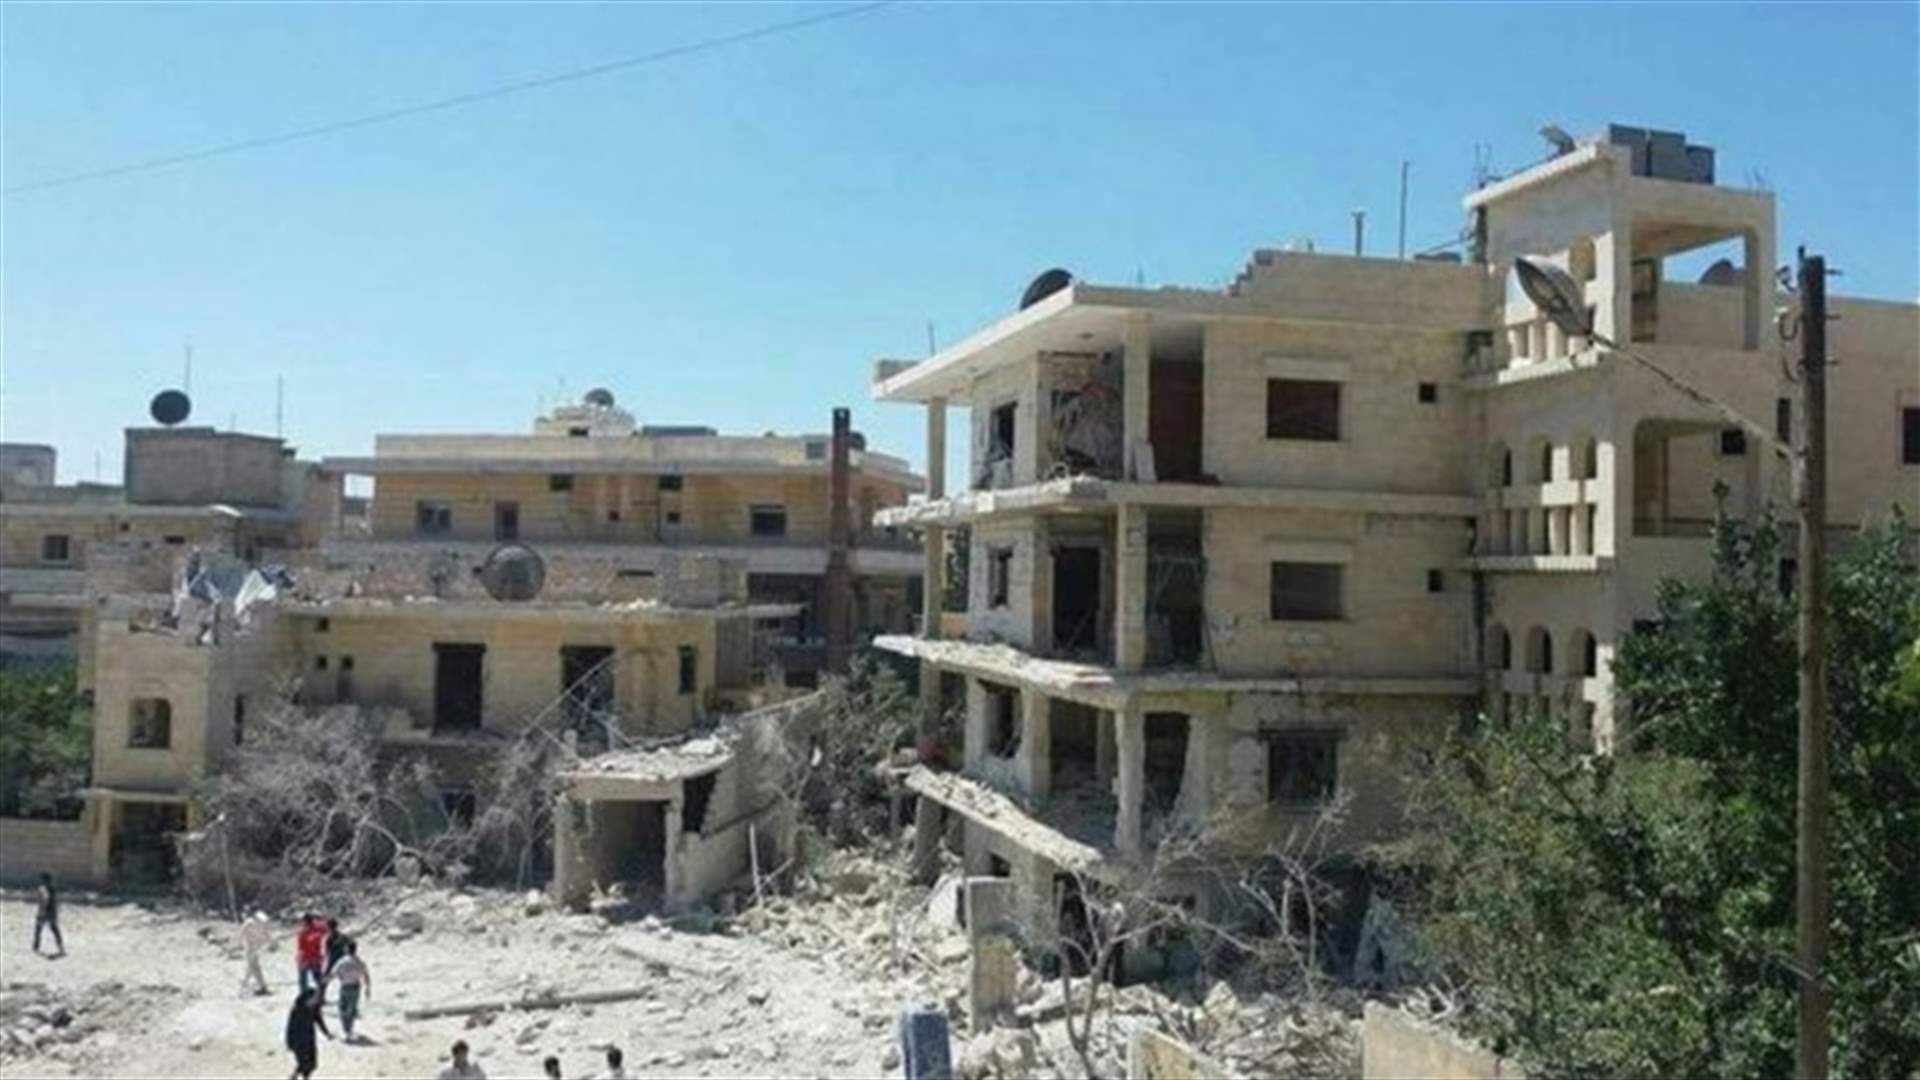 Syrian maternity hospital supported by Save the Children bombed - charity